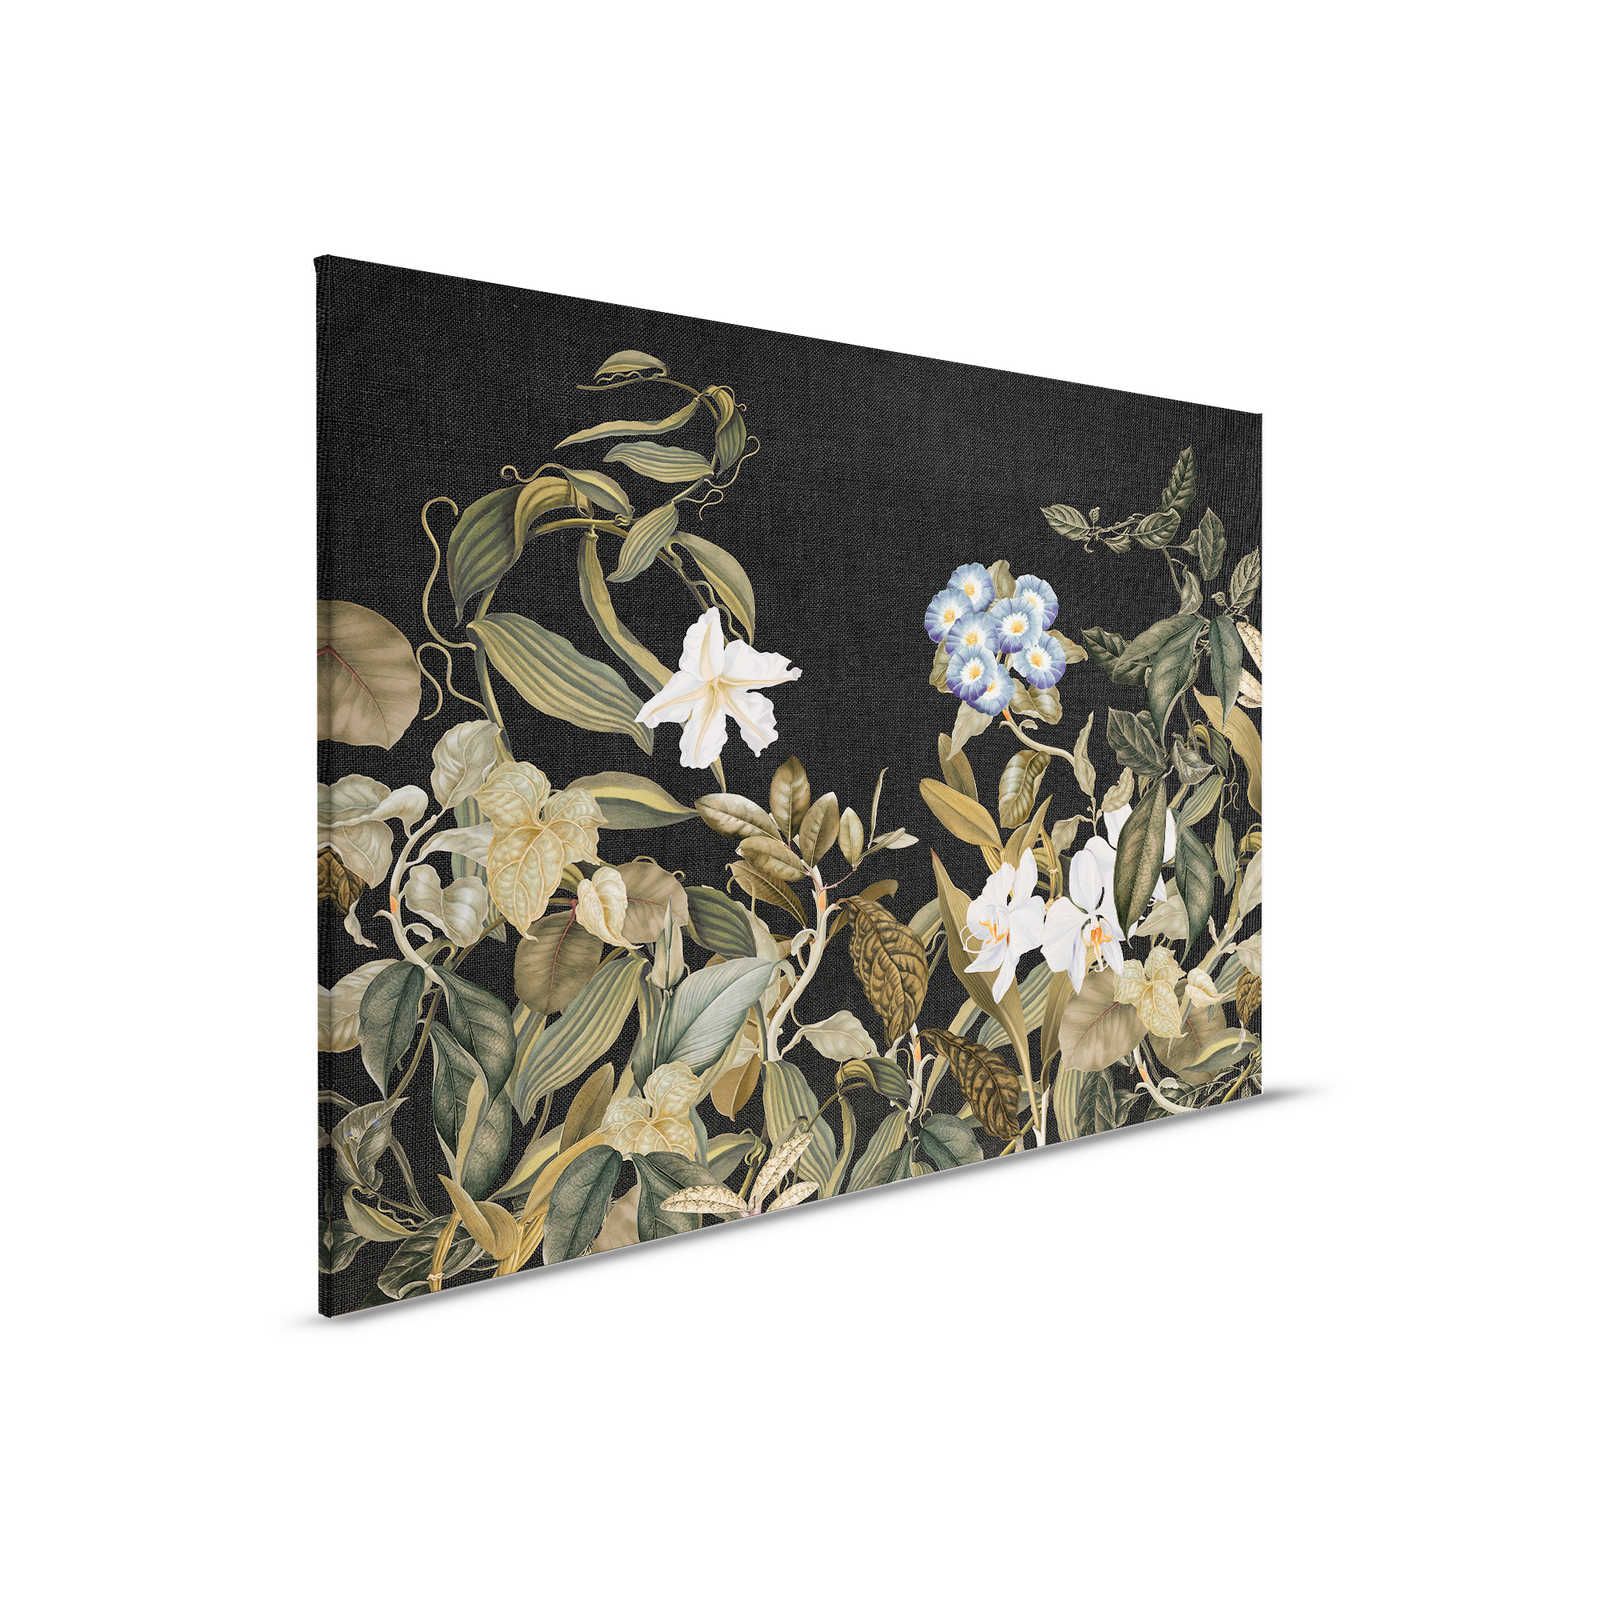         Botanical Canvas Painting with Orchids & Leaves Motif - 0.90 m x 0.60 m
    